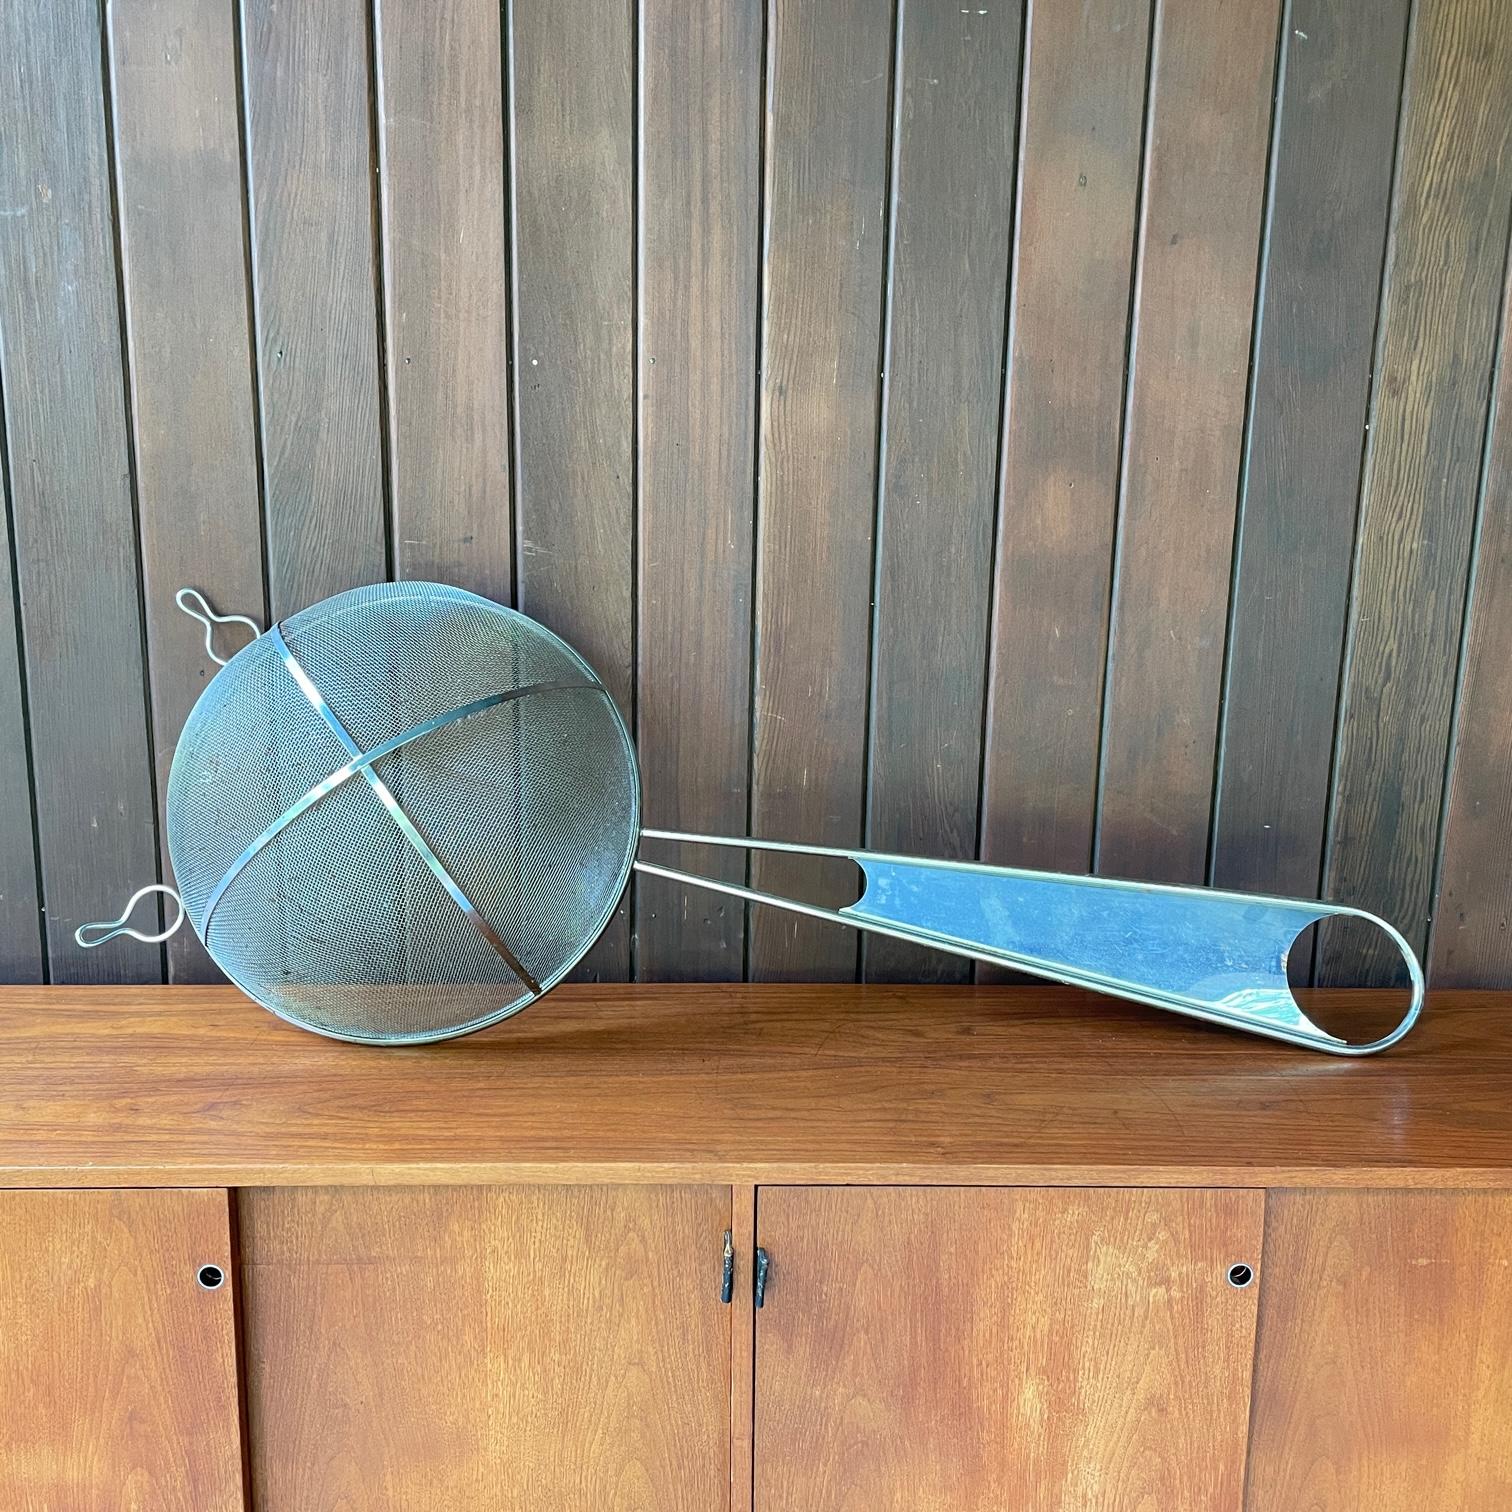 Mid-Century Modern 1960s Giant Strainer Kitchen Sign Wall Art Sculpture Chrome Basket Tool For Sale